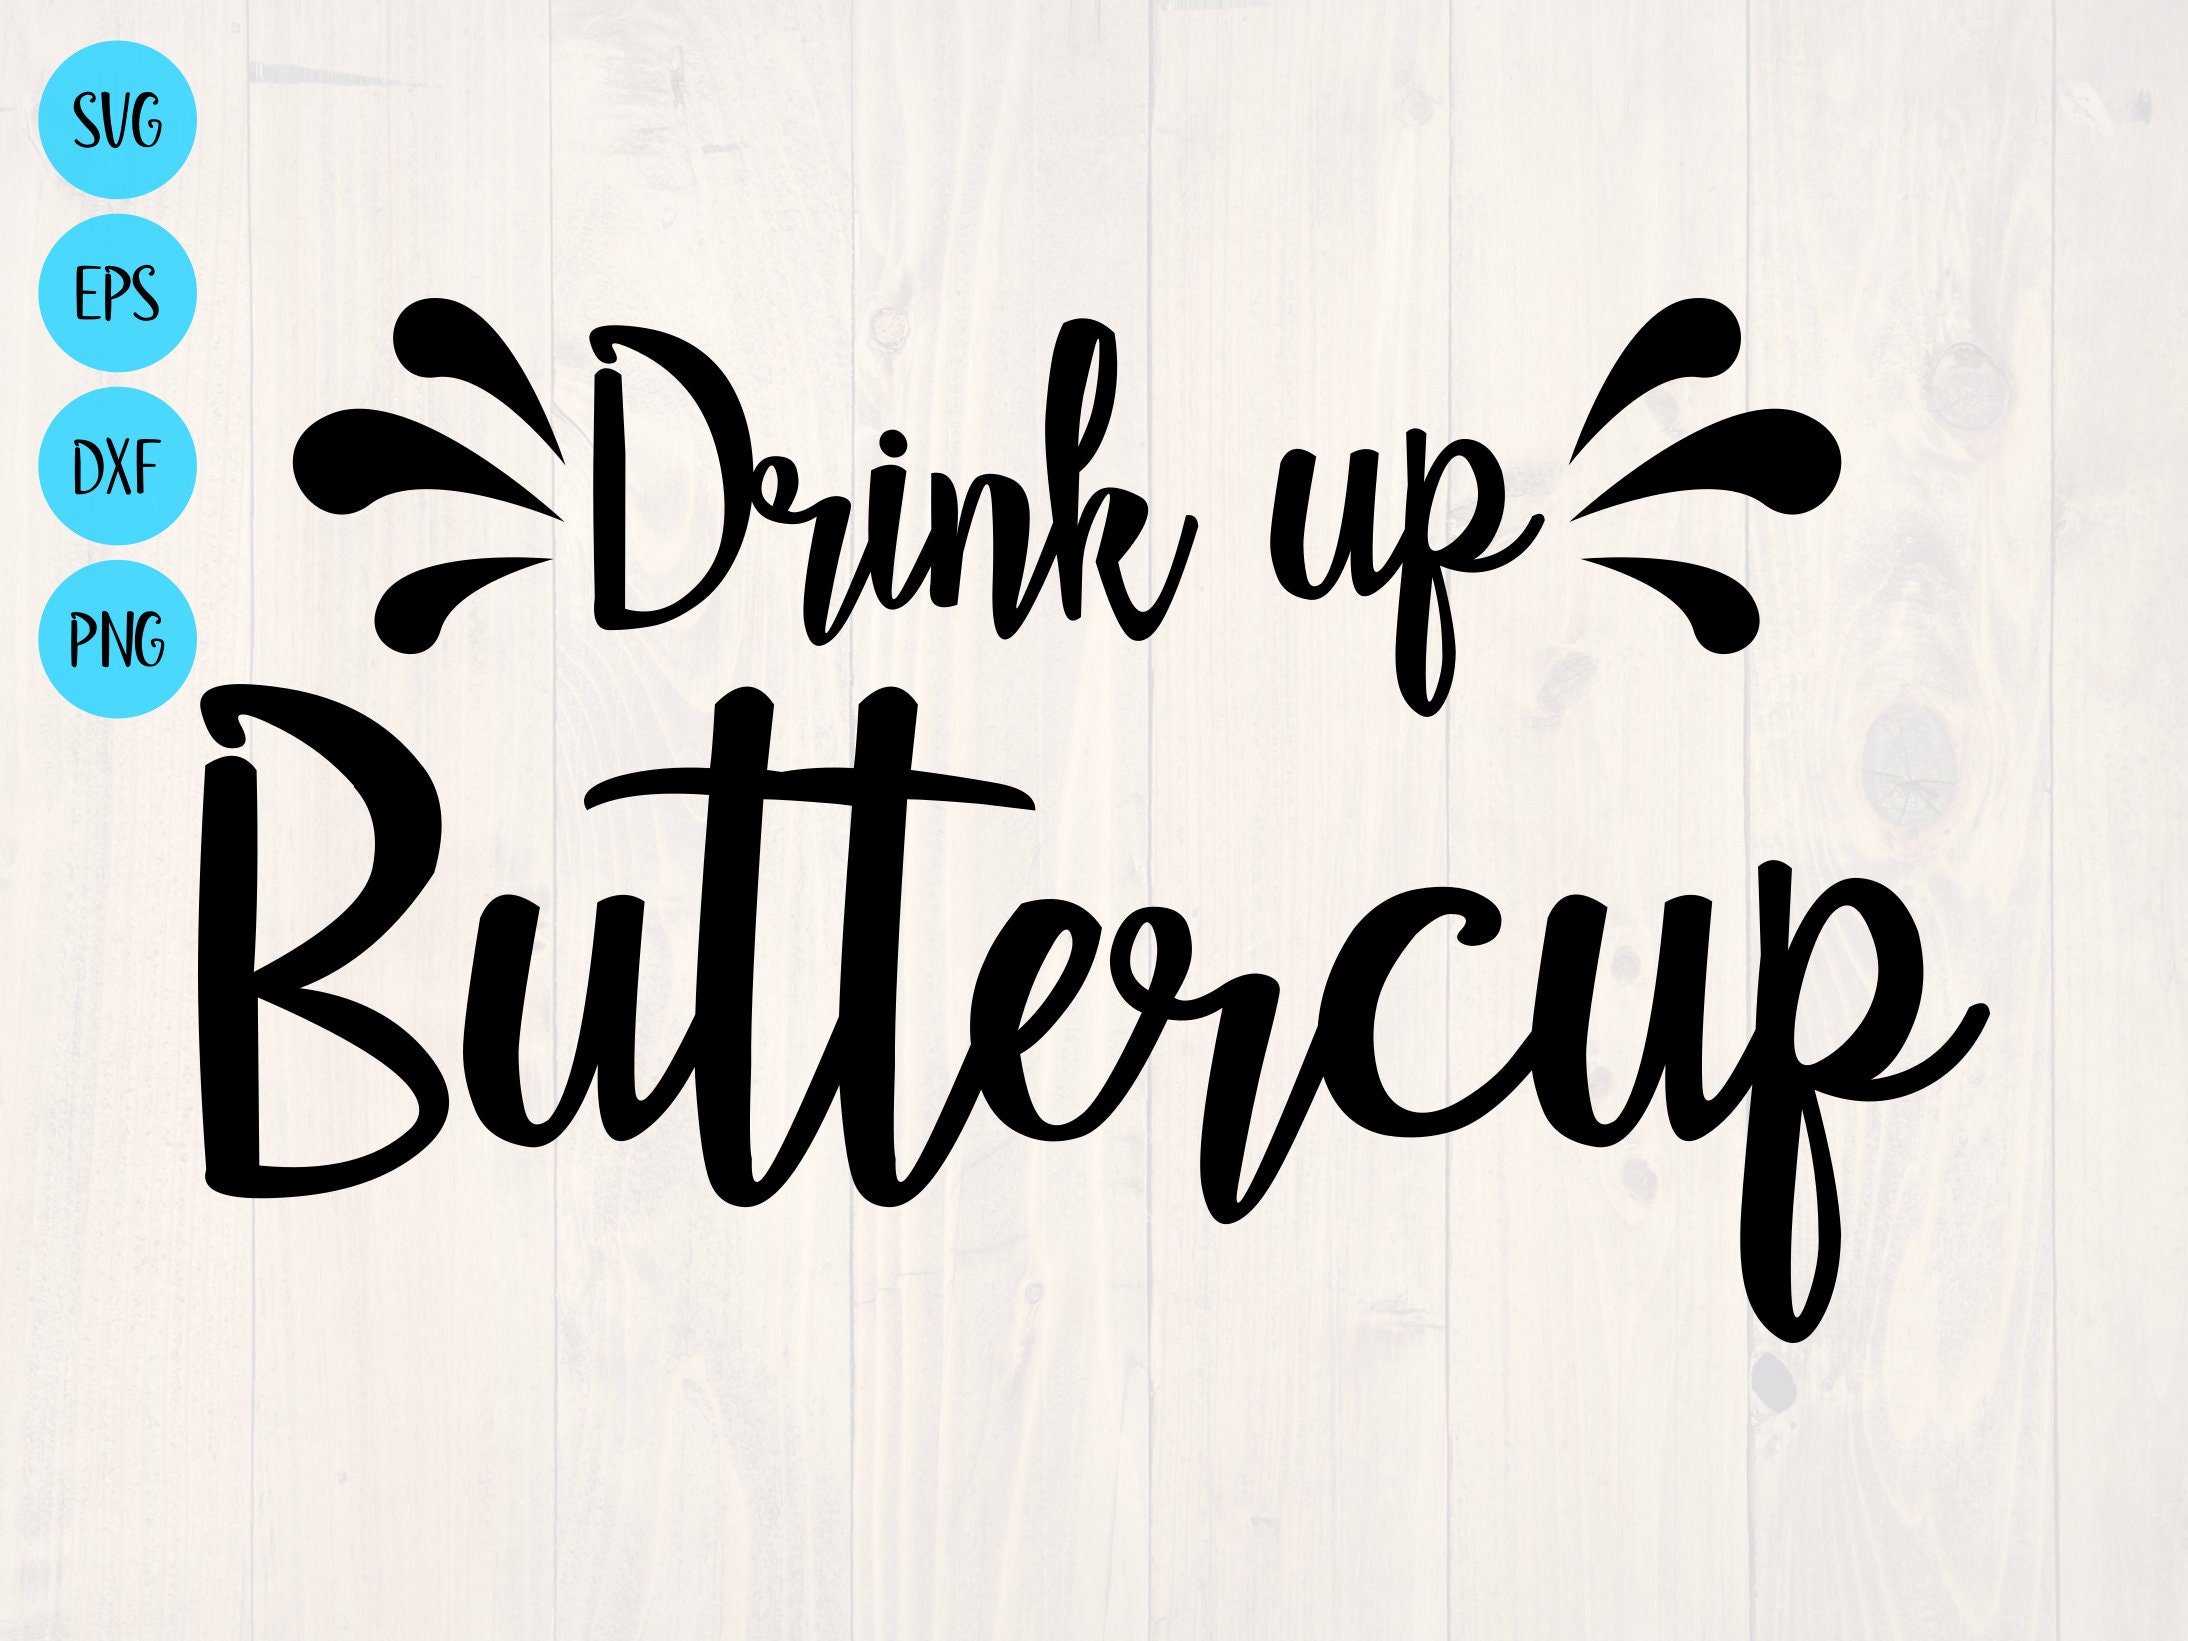 Drink up buttercup SVG is a funny alcohol shirt design